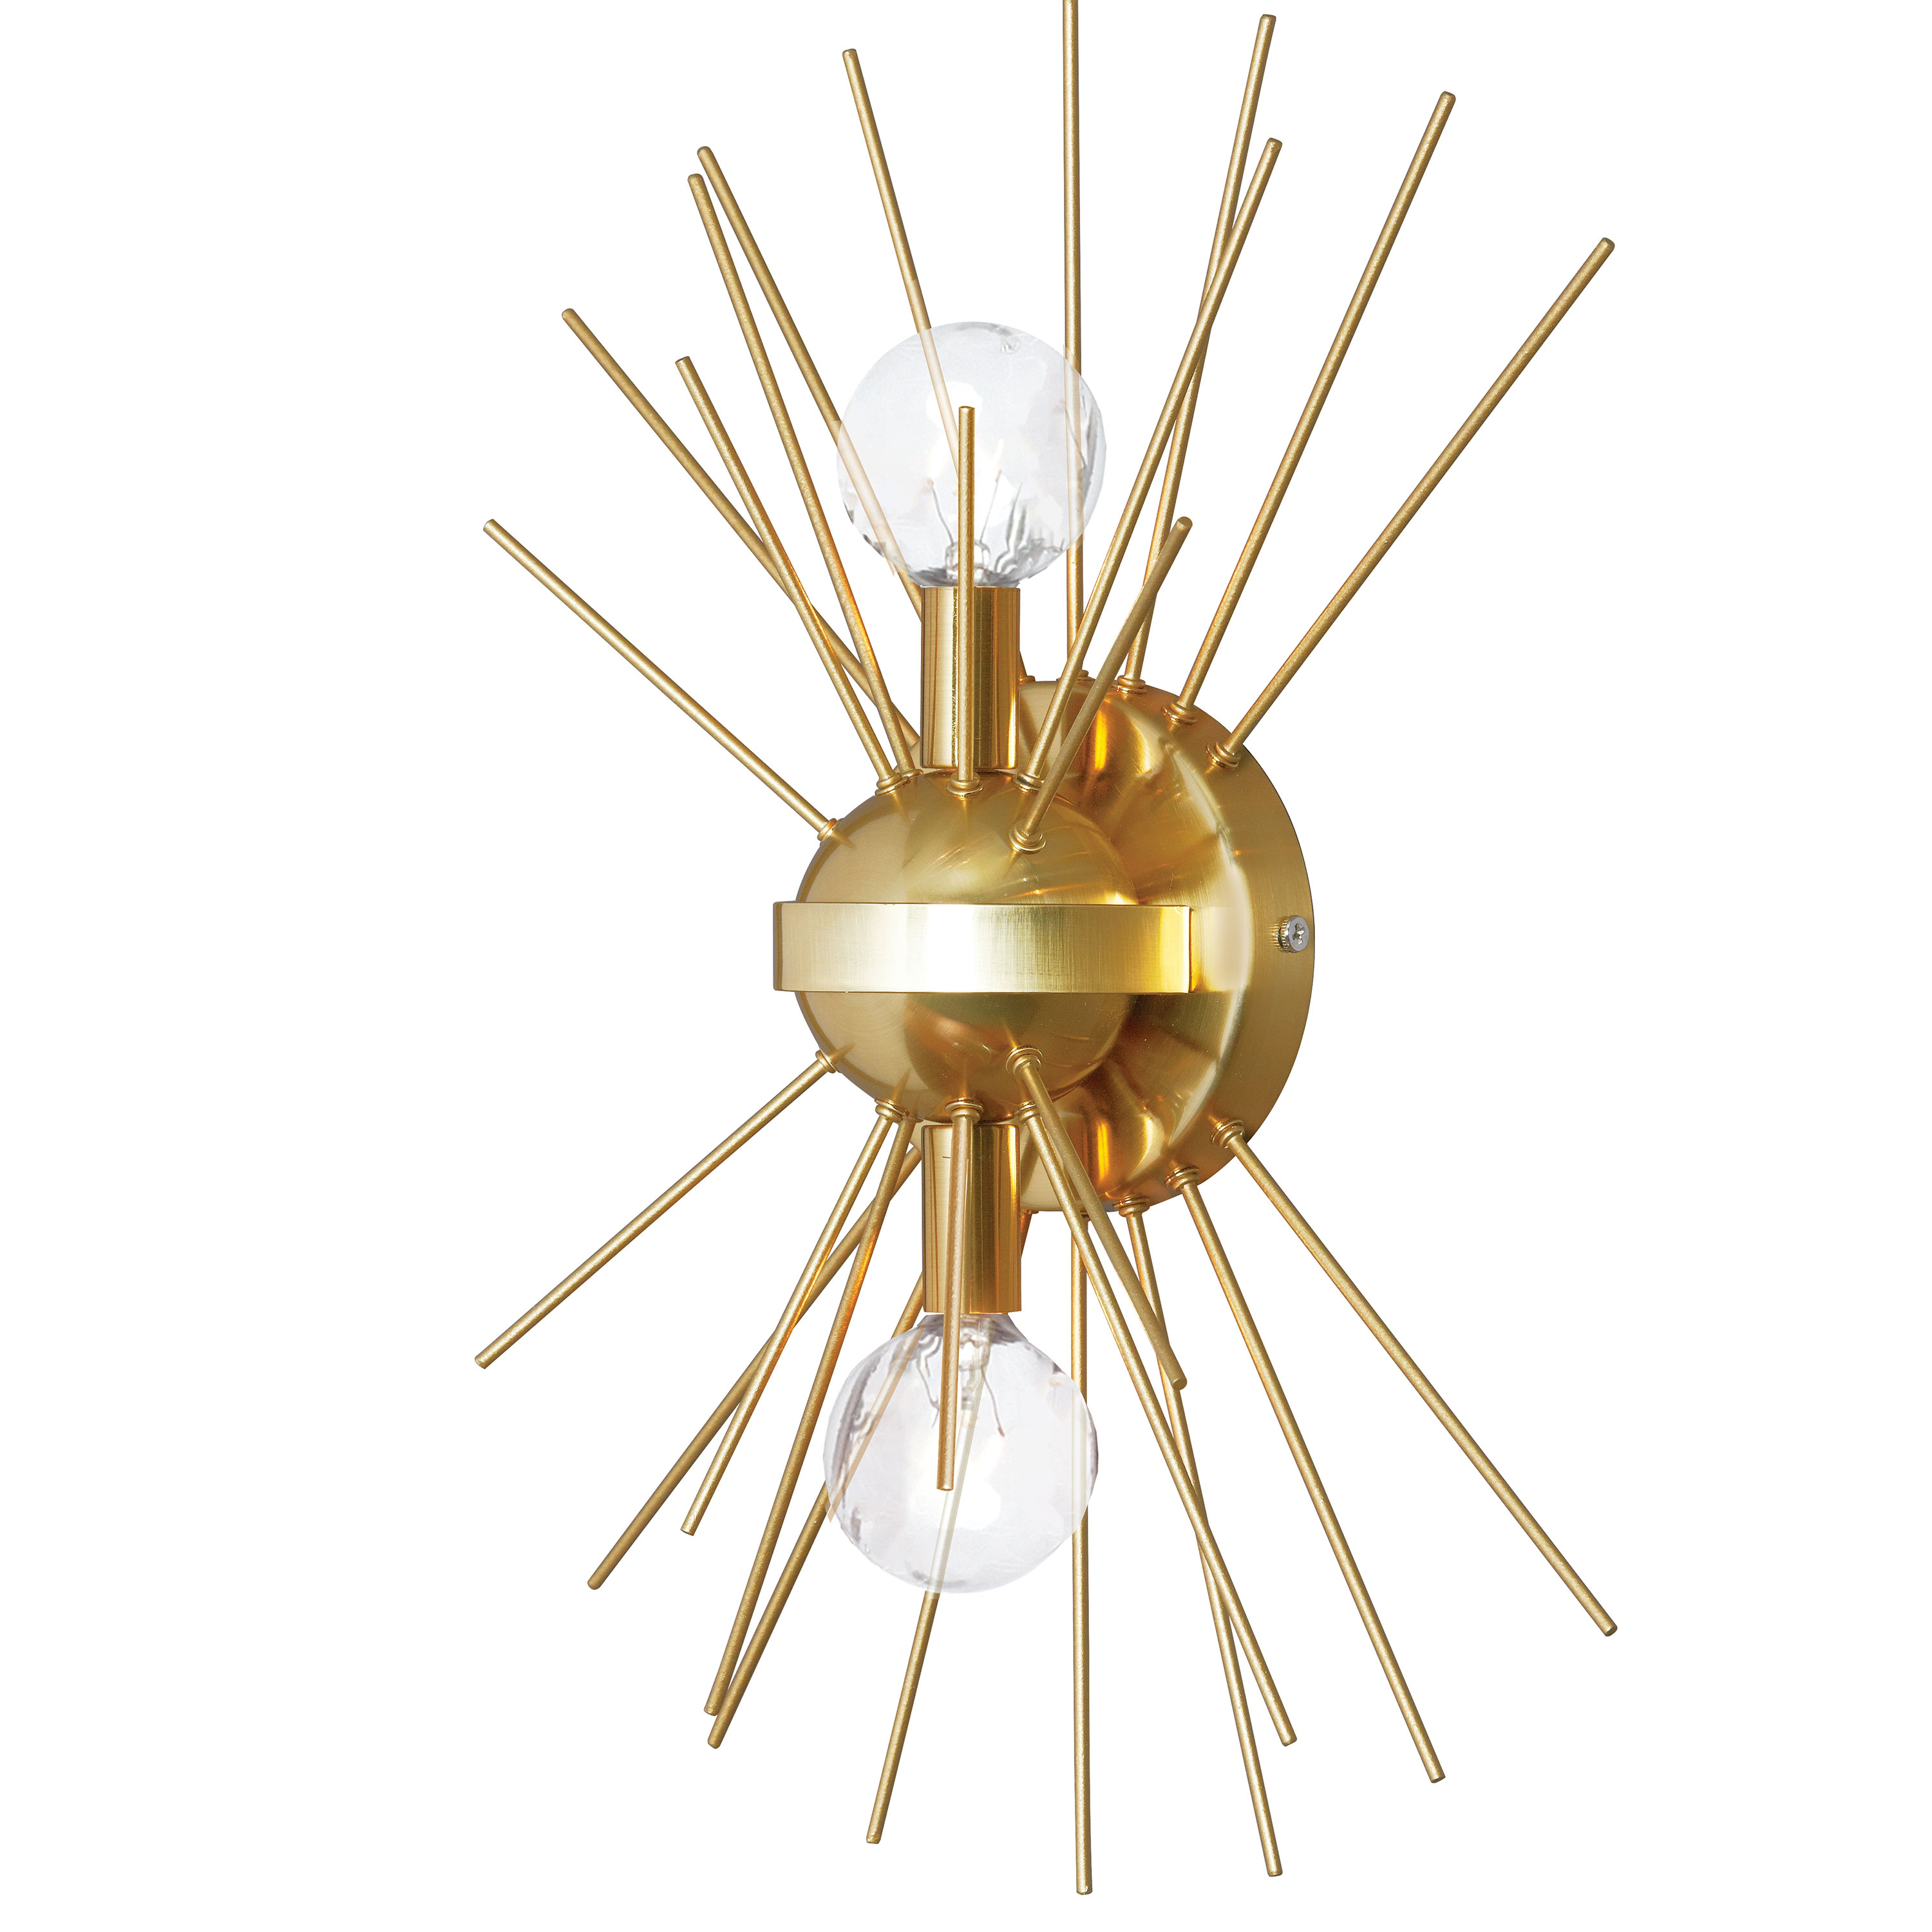 Vega sconce finished in gold with sputnik-like spikes from Dainolite